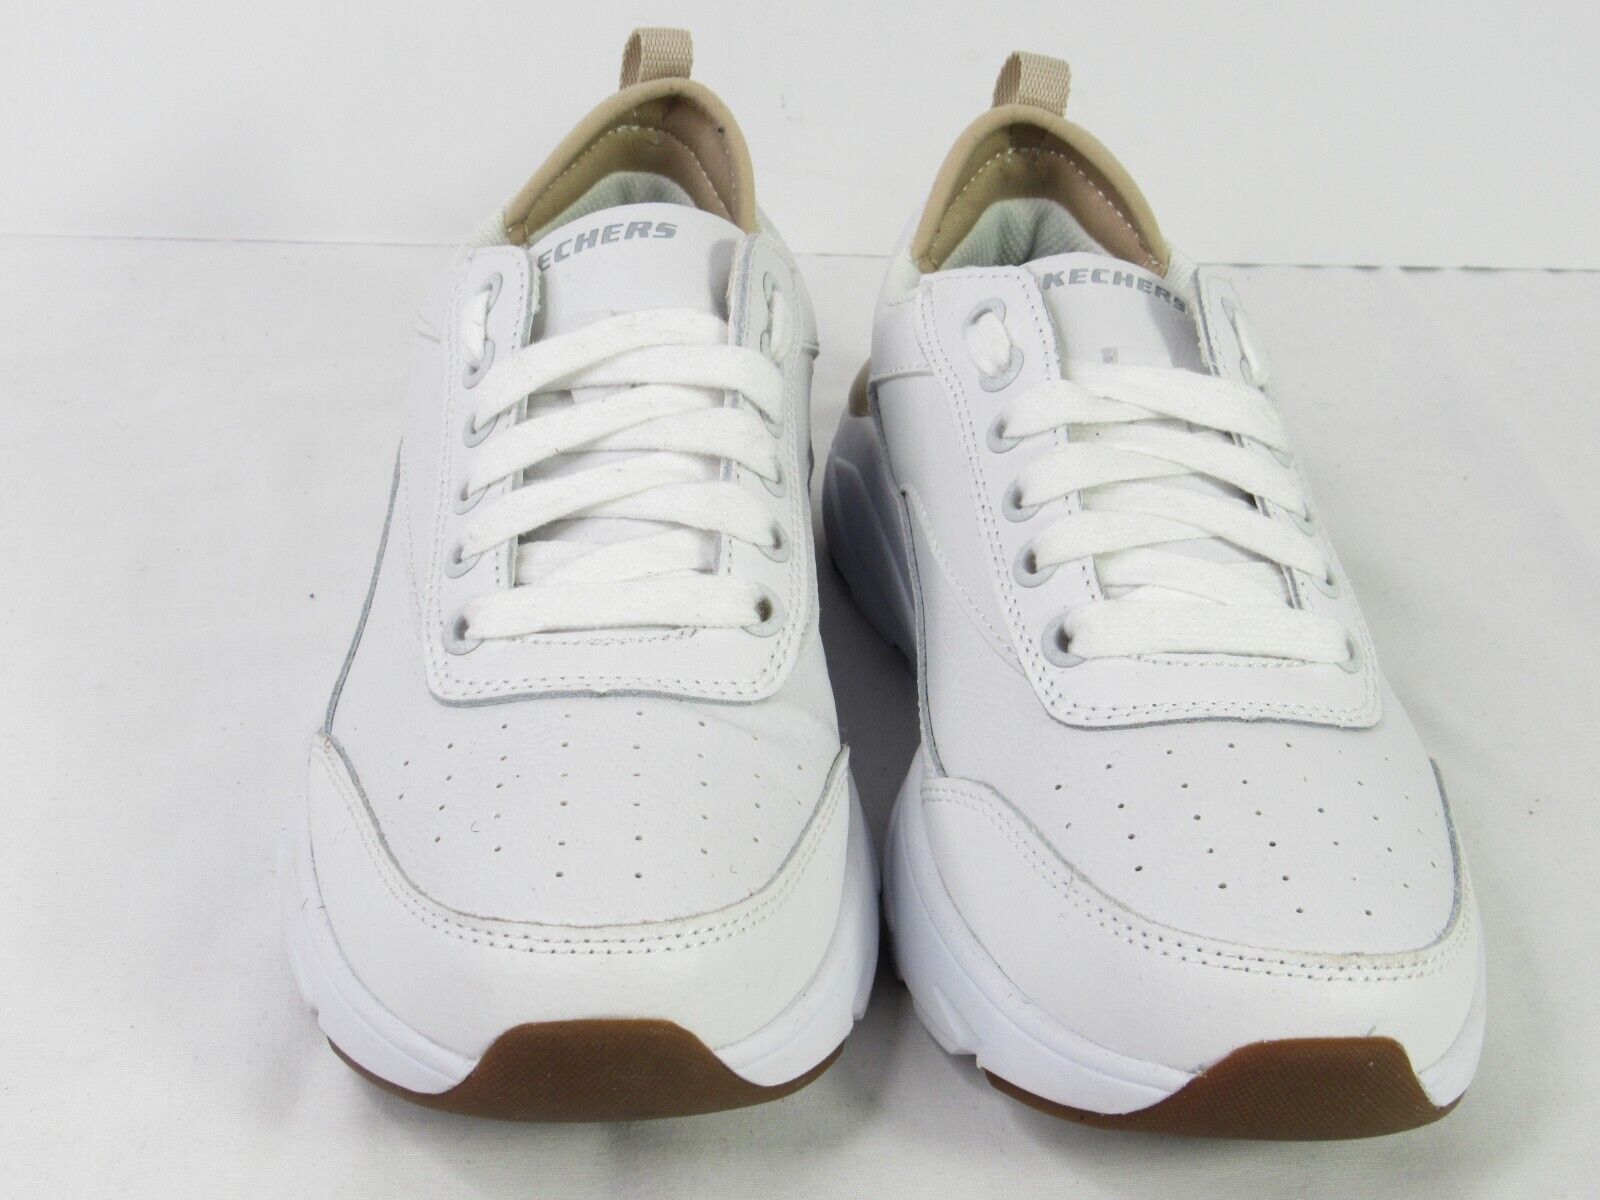 Relaxed Fit Verrado Corden Oxford Shoes 65874-Whtite Size 8 | eBay